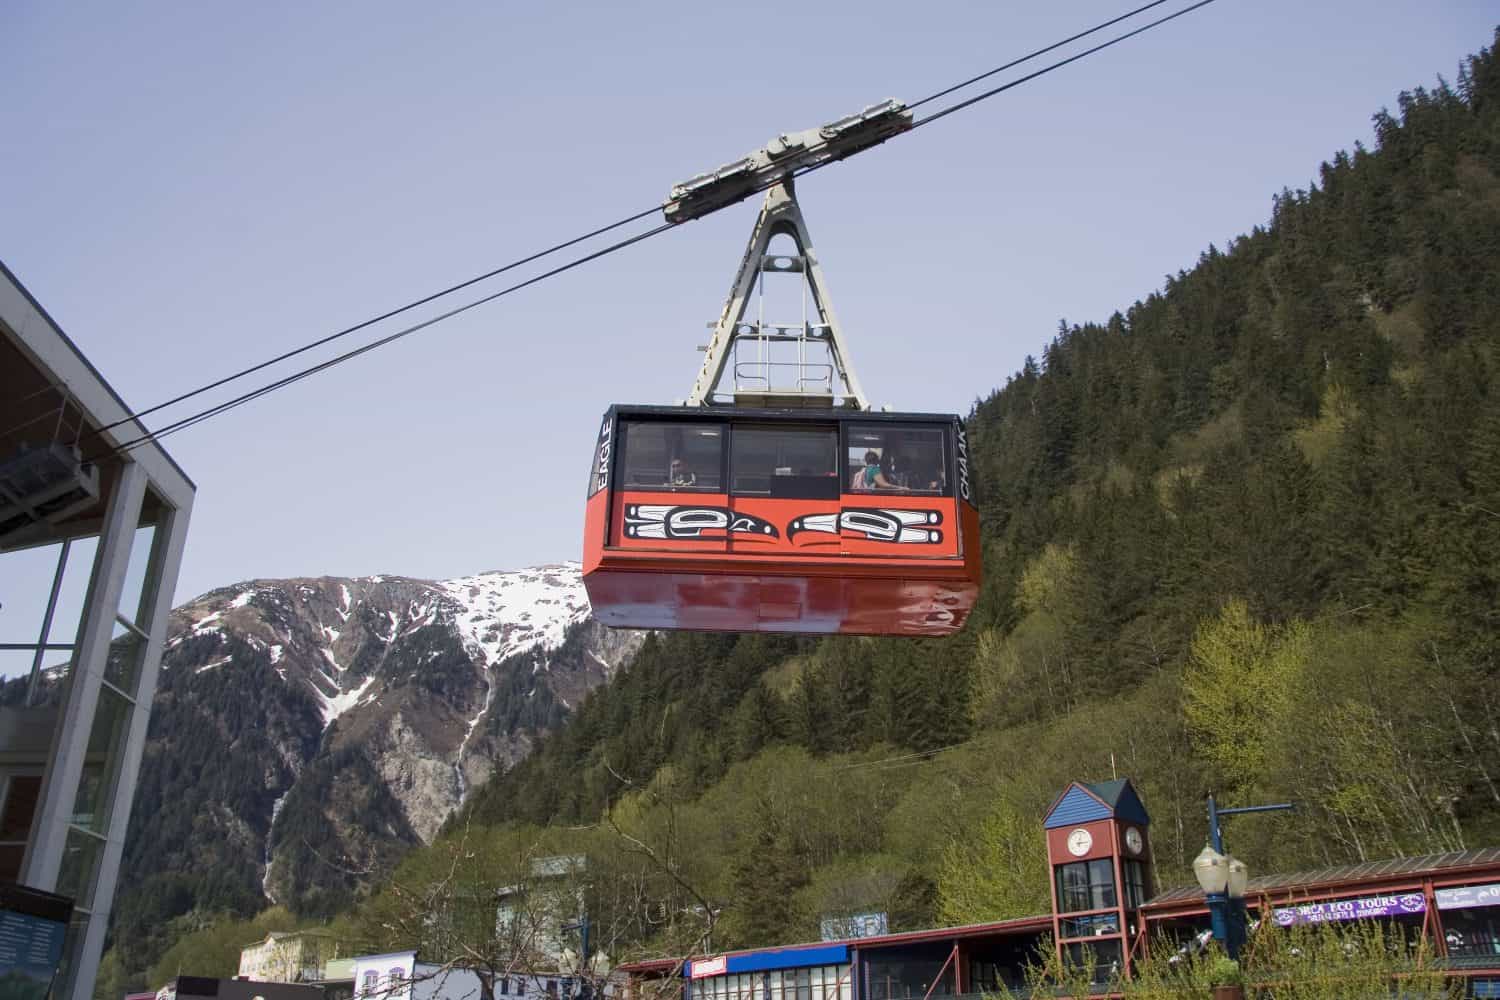 Mount Roberts Tramway in Juneau, Alaska taking riders to the top of the mountain